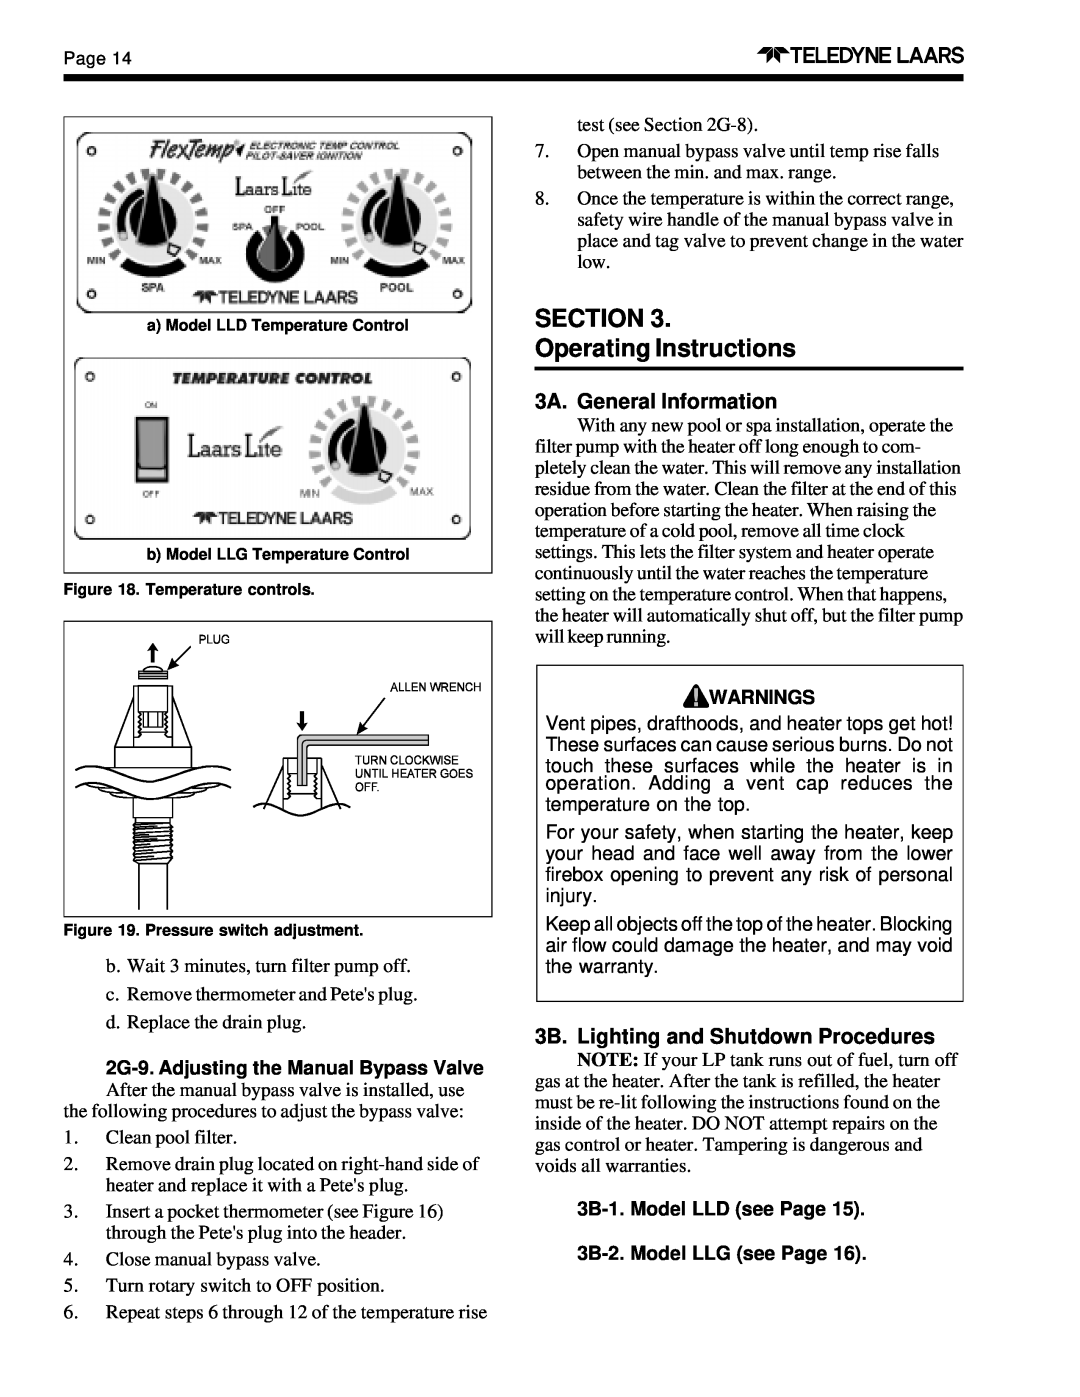 Teledyne LLD, LLG SECTION Operating Instructions, 3A. General Information, 3B. Lighting and Shutdown Procedures, Warnings 